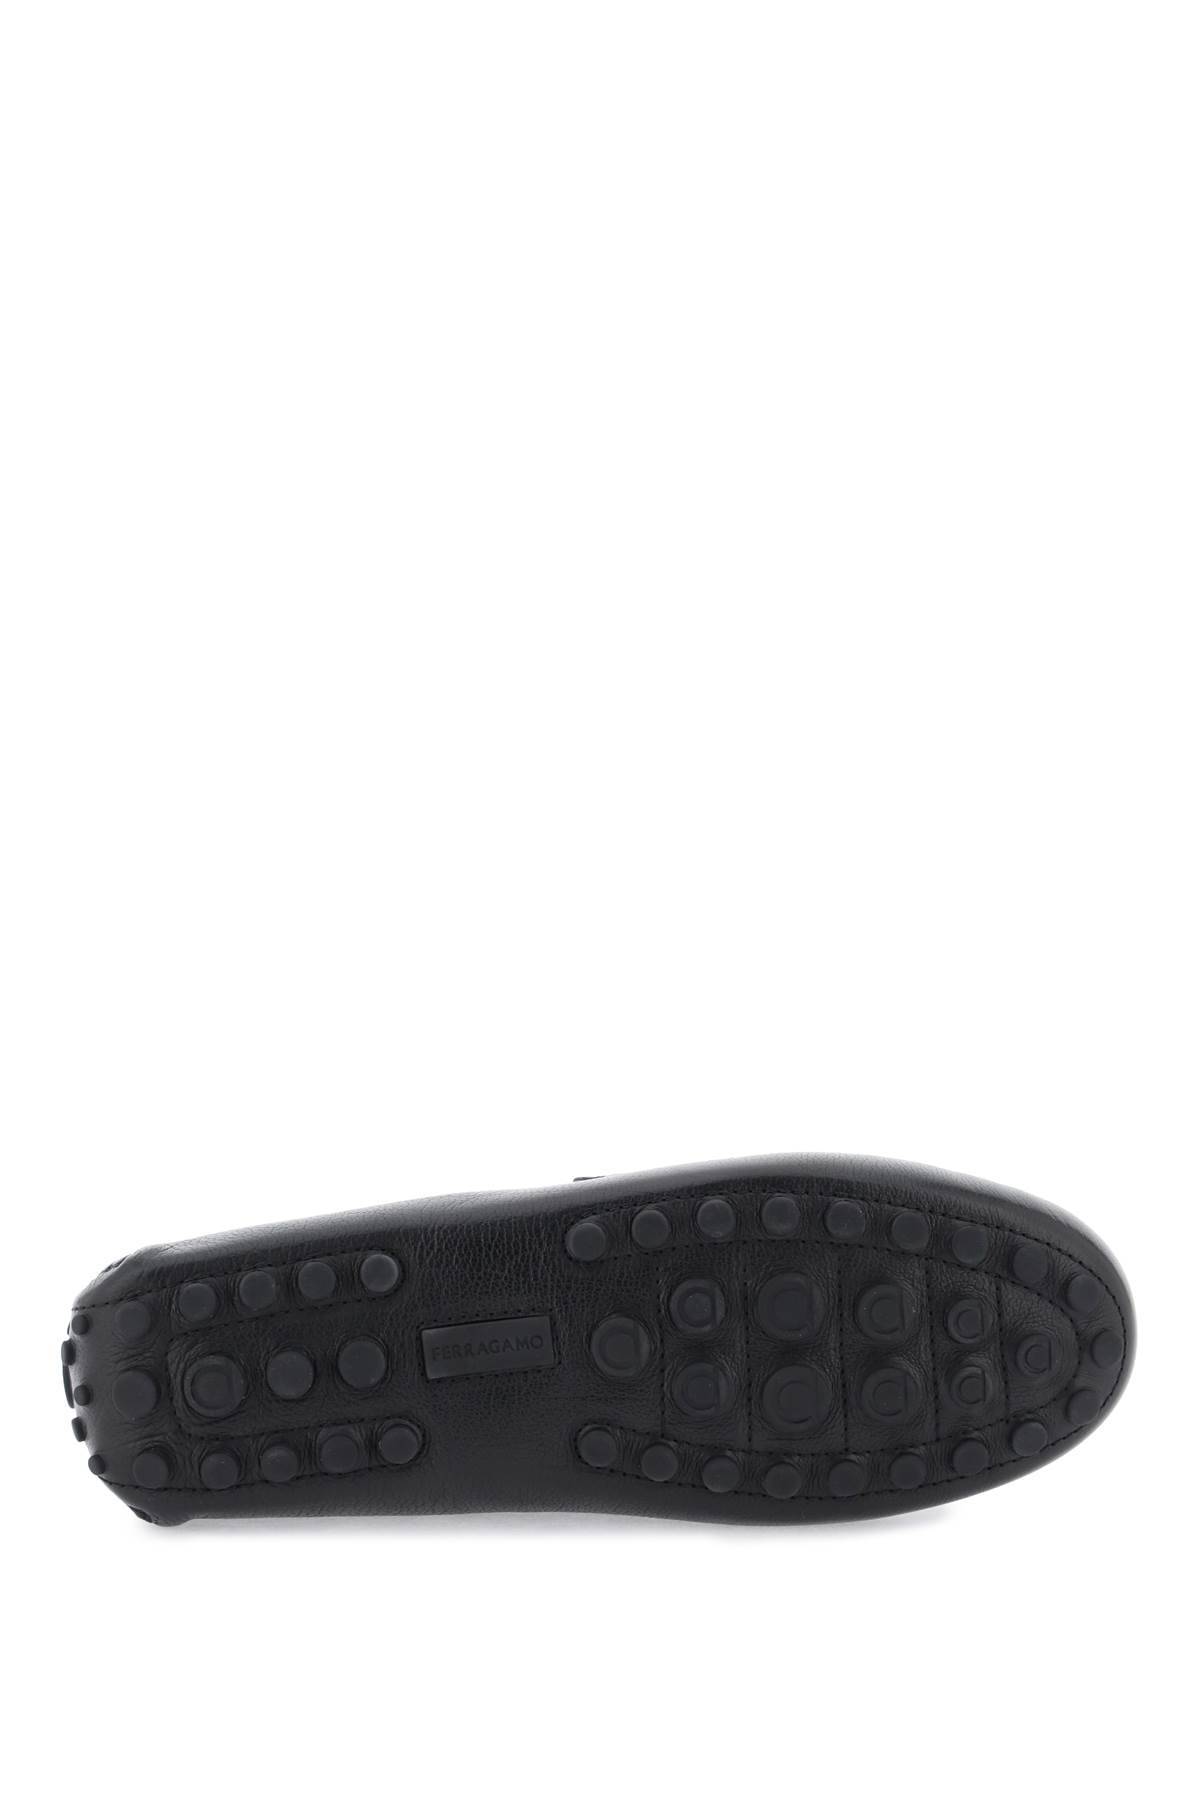 Shop Ferragamo Loafers With Gancini Detail In Black